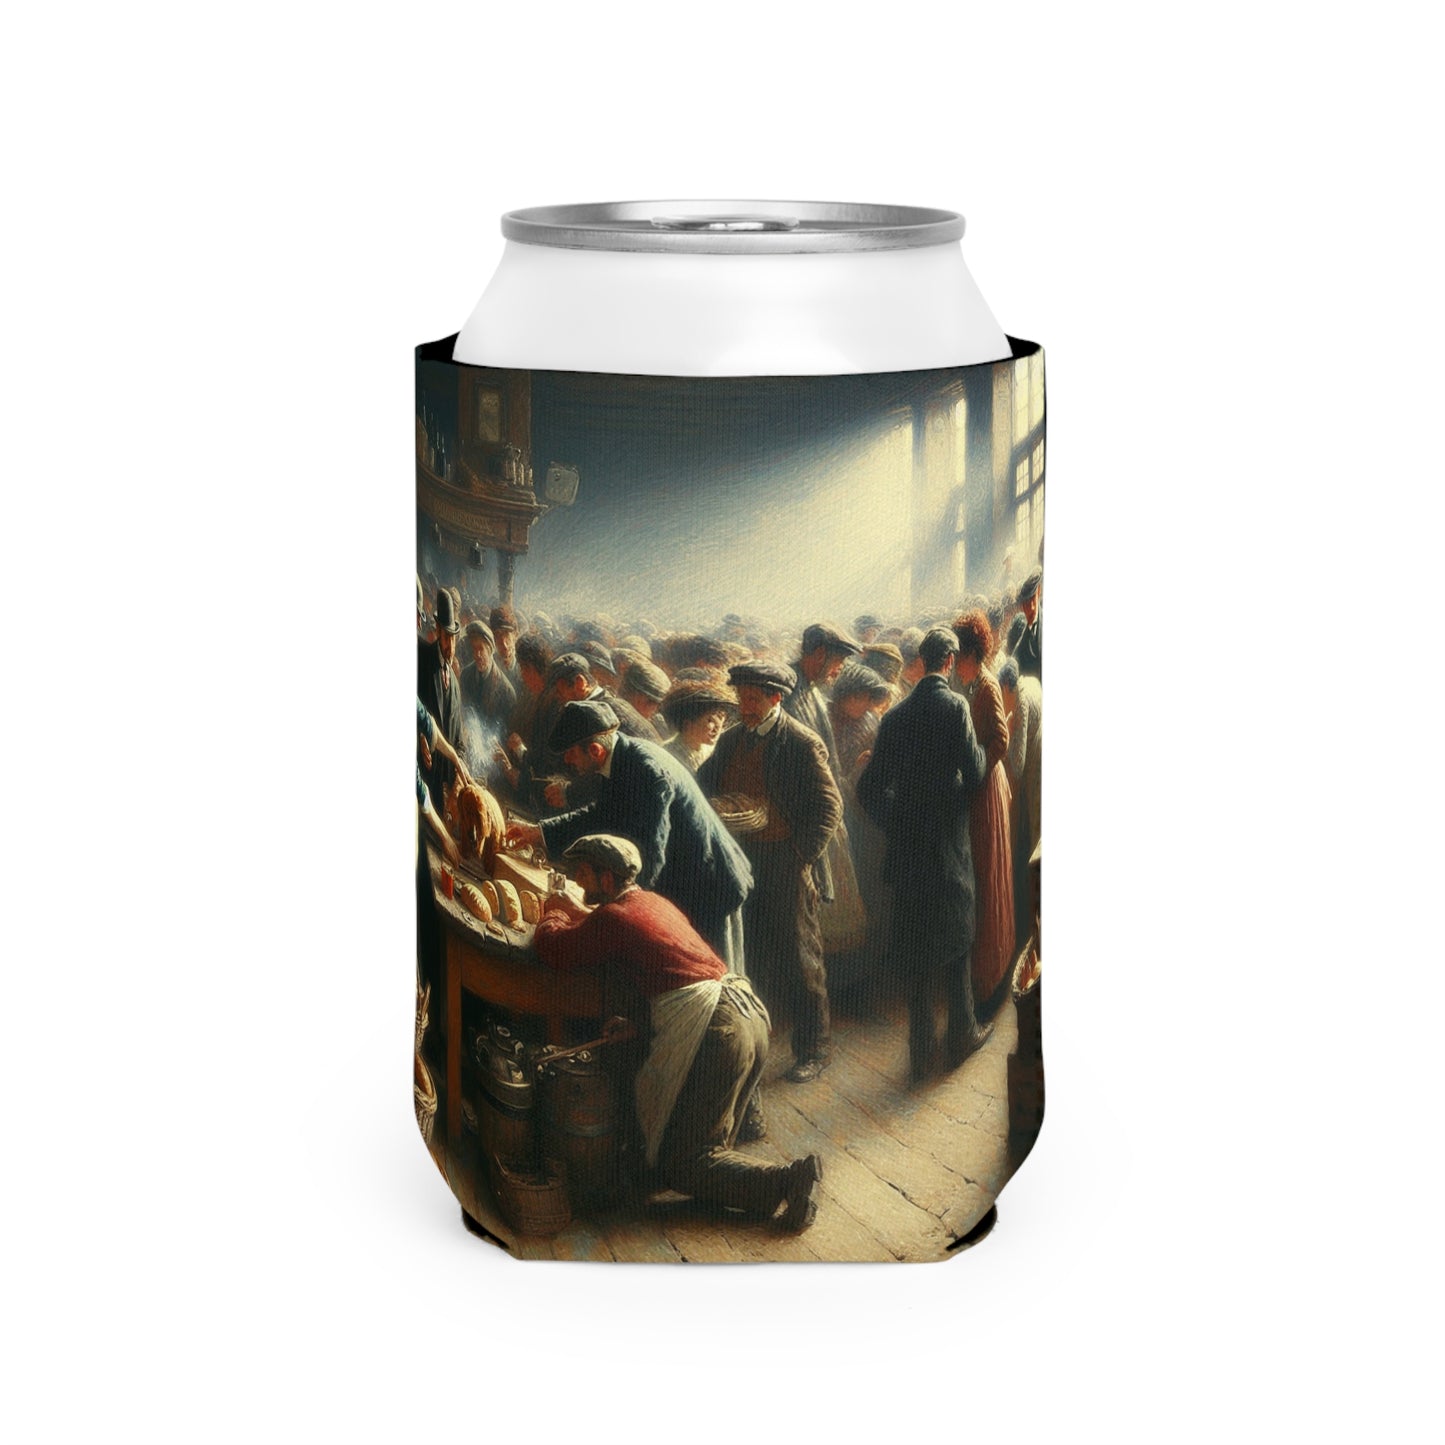 Title: "Conversations for Change" - The Alien Can Cooler Sleeve Social Realism